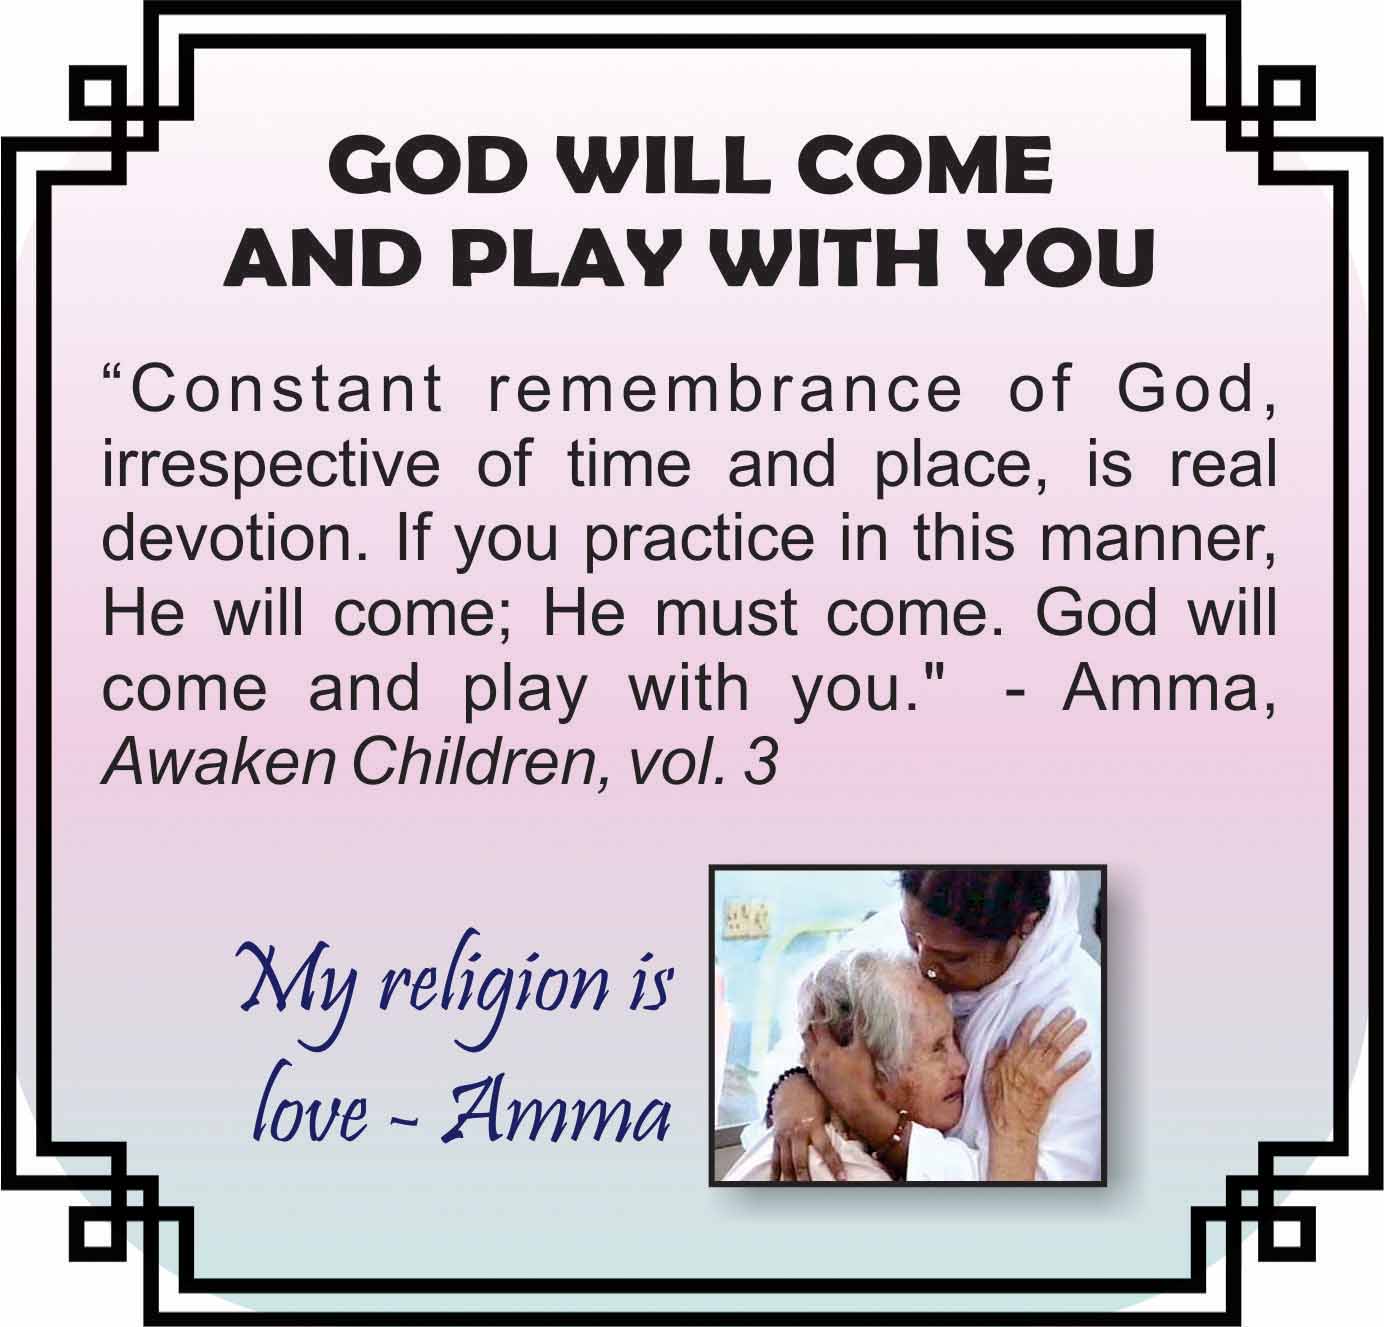 God will play with you